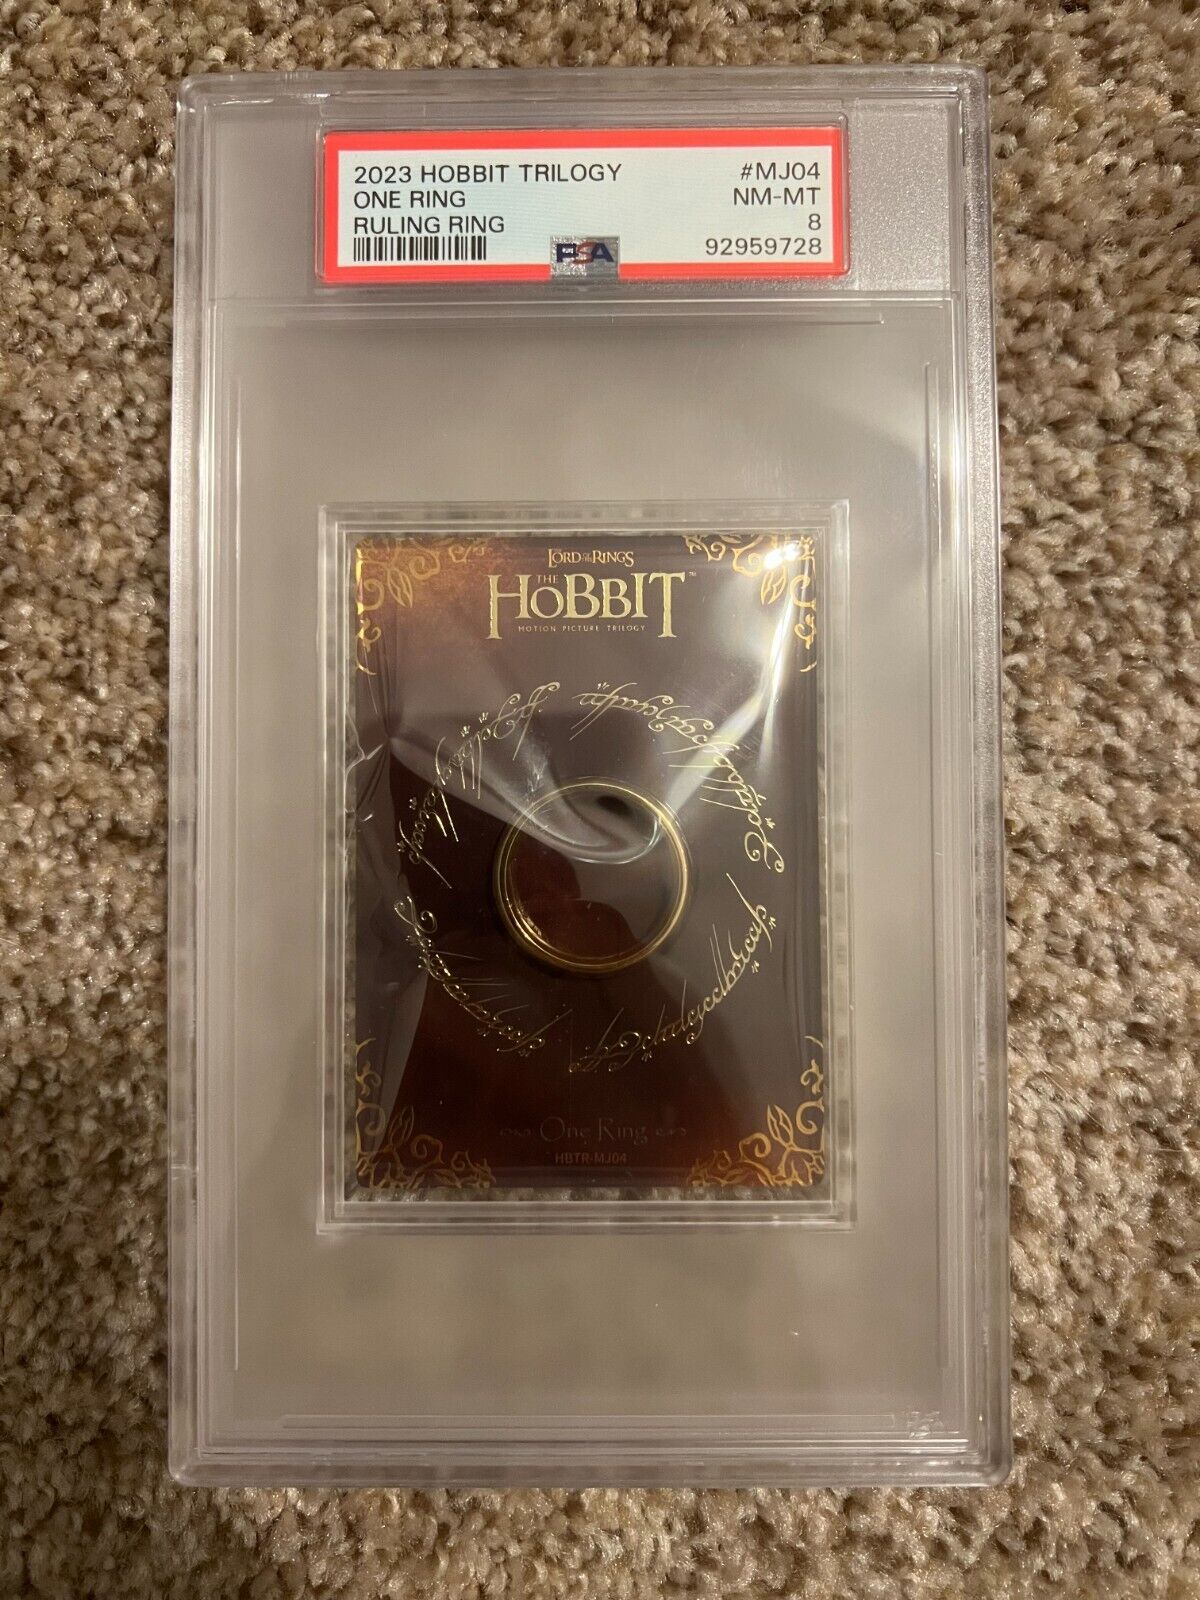 The Hobbit - Lord Of The Rings - ONE RING - Card Fun Trading Card TCG PSA 8